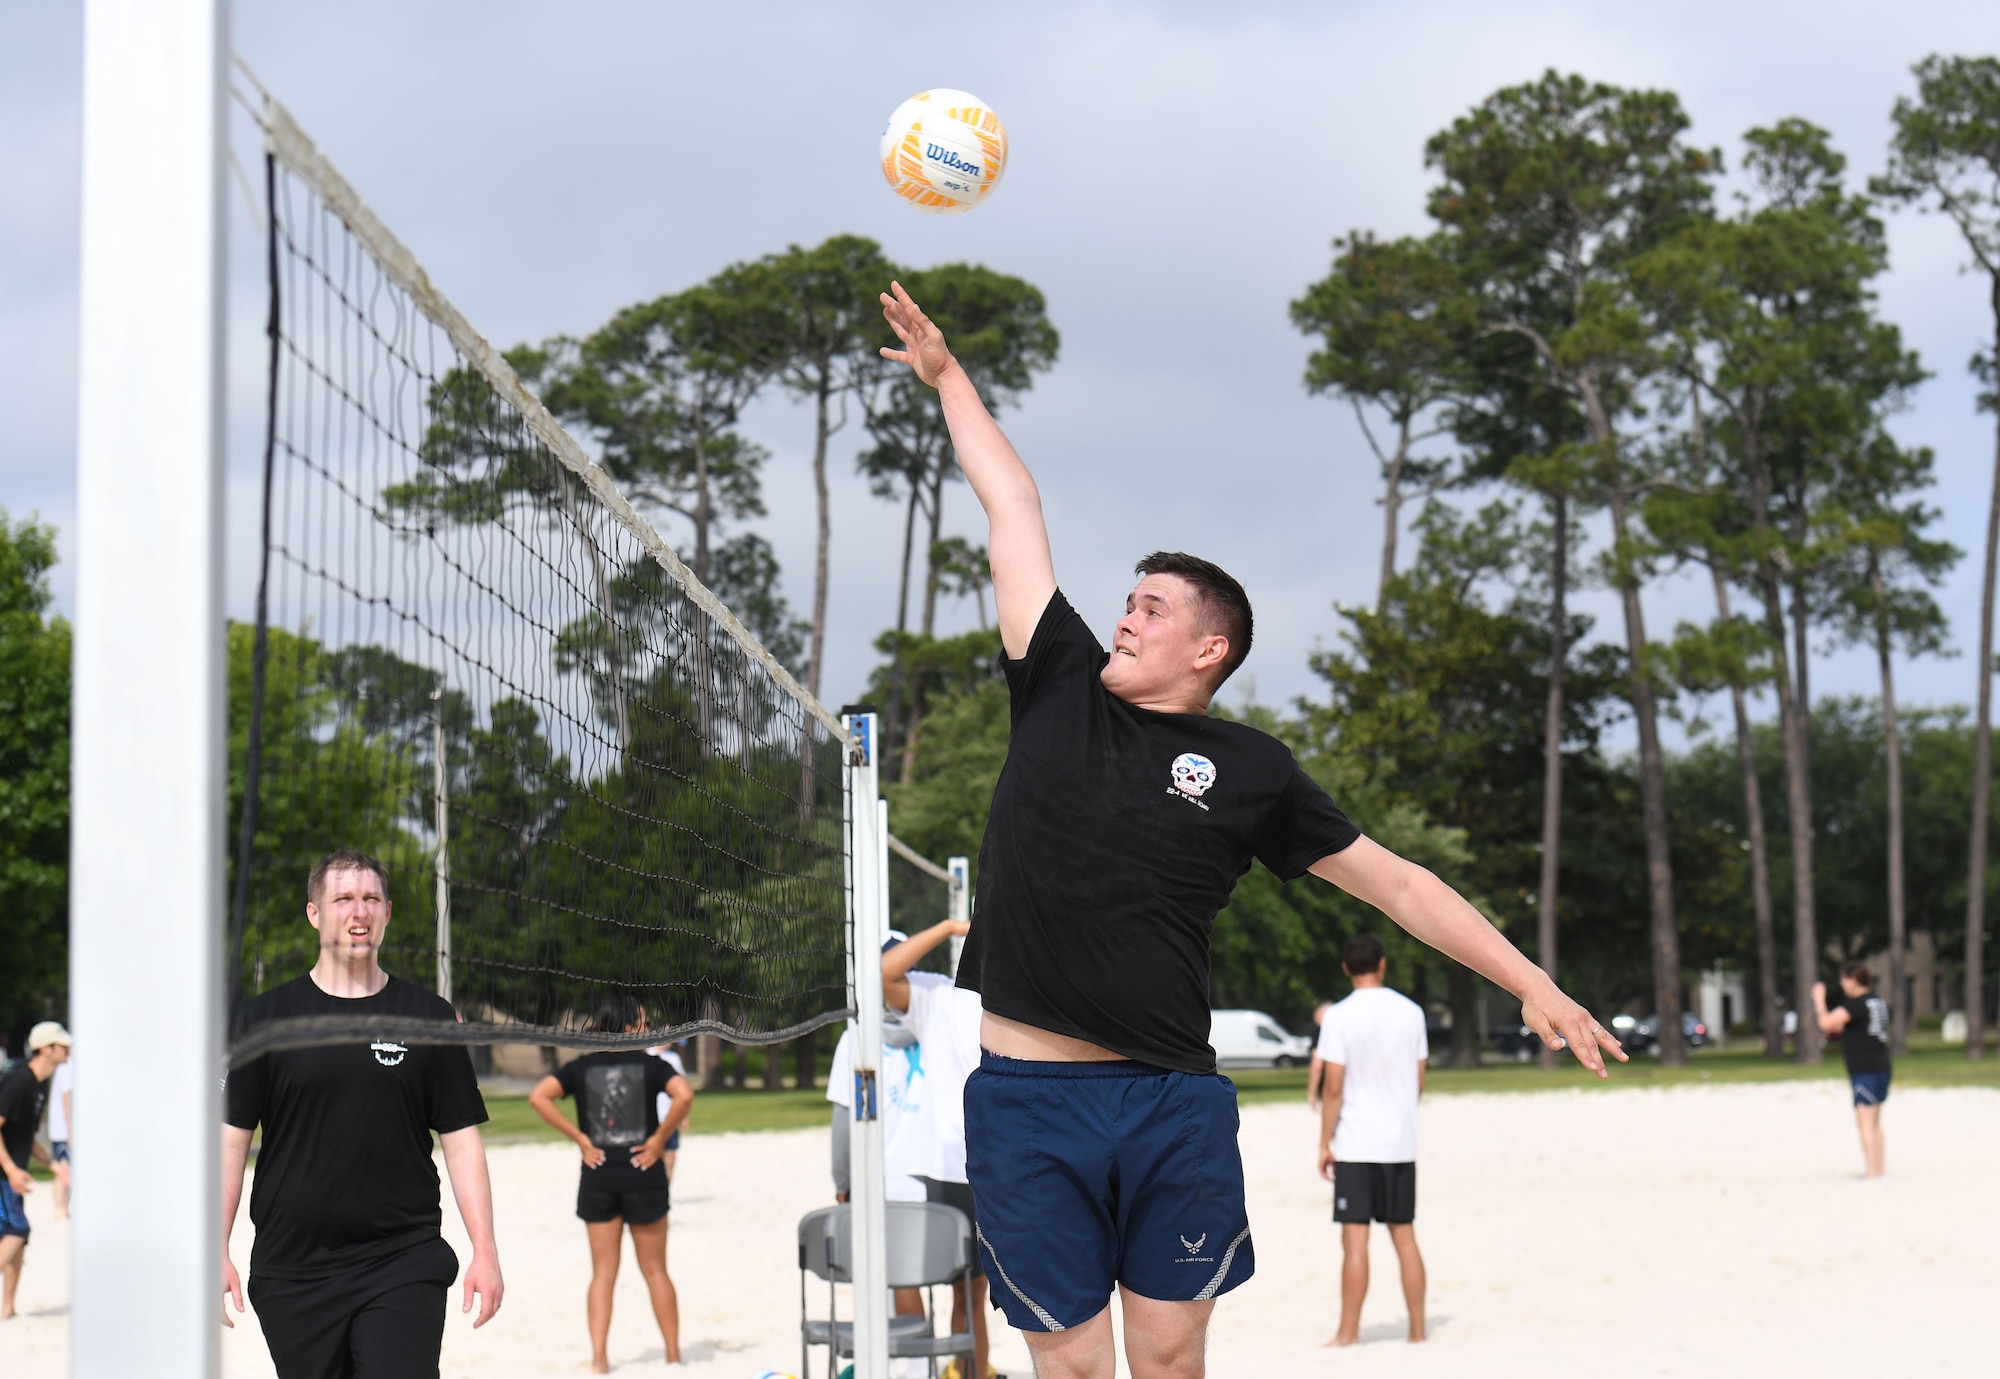 U.S. Air Force Senior Airman Jacob Pettibone, Airman Leadership School student, hits a volleyball during the Sexual Assault and Awareness Prevention Month volleyball tournament at Keesler Air Force Base, Mississippi, April 29, 2022. More than 20 teams competed in the event, which was held in acknowledgment of Sexual Assault and Awareness Prevention Month throughout April. (U.S. Air Force photo by Kemberly Groue)